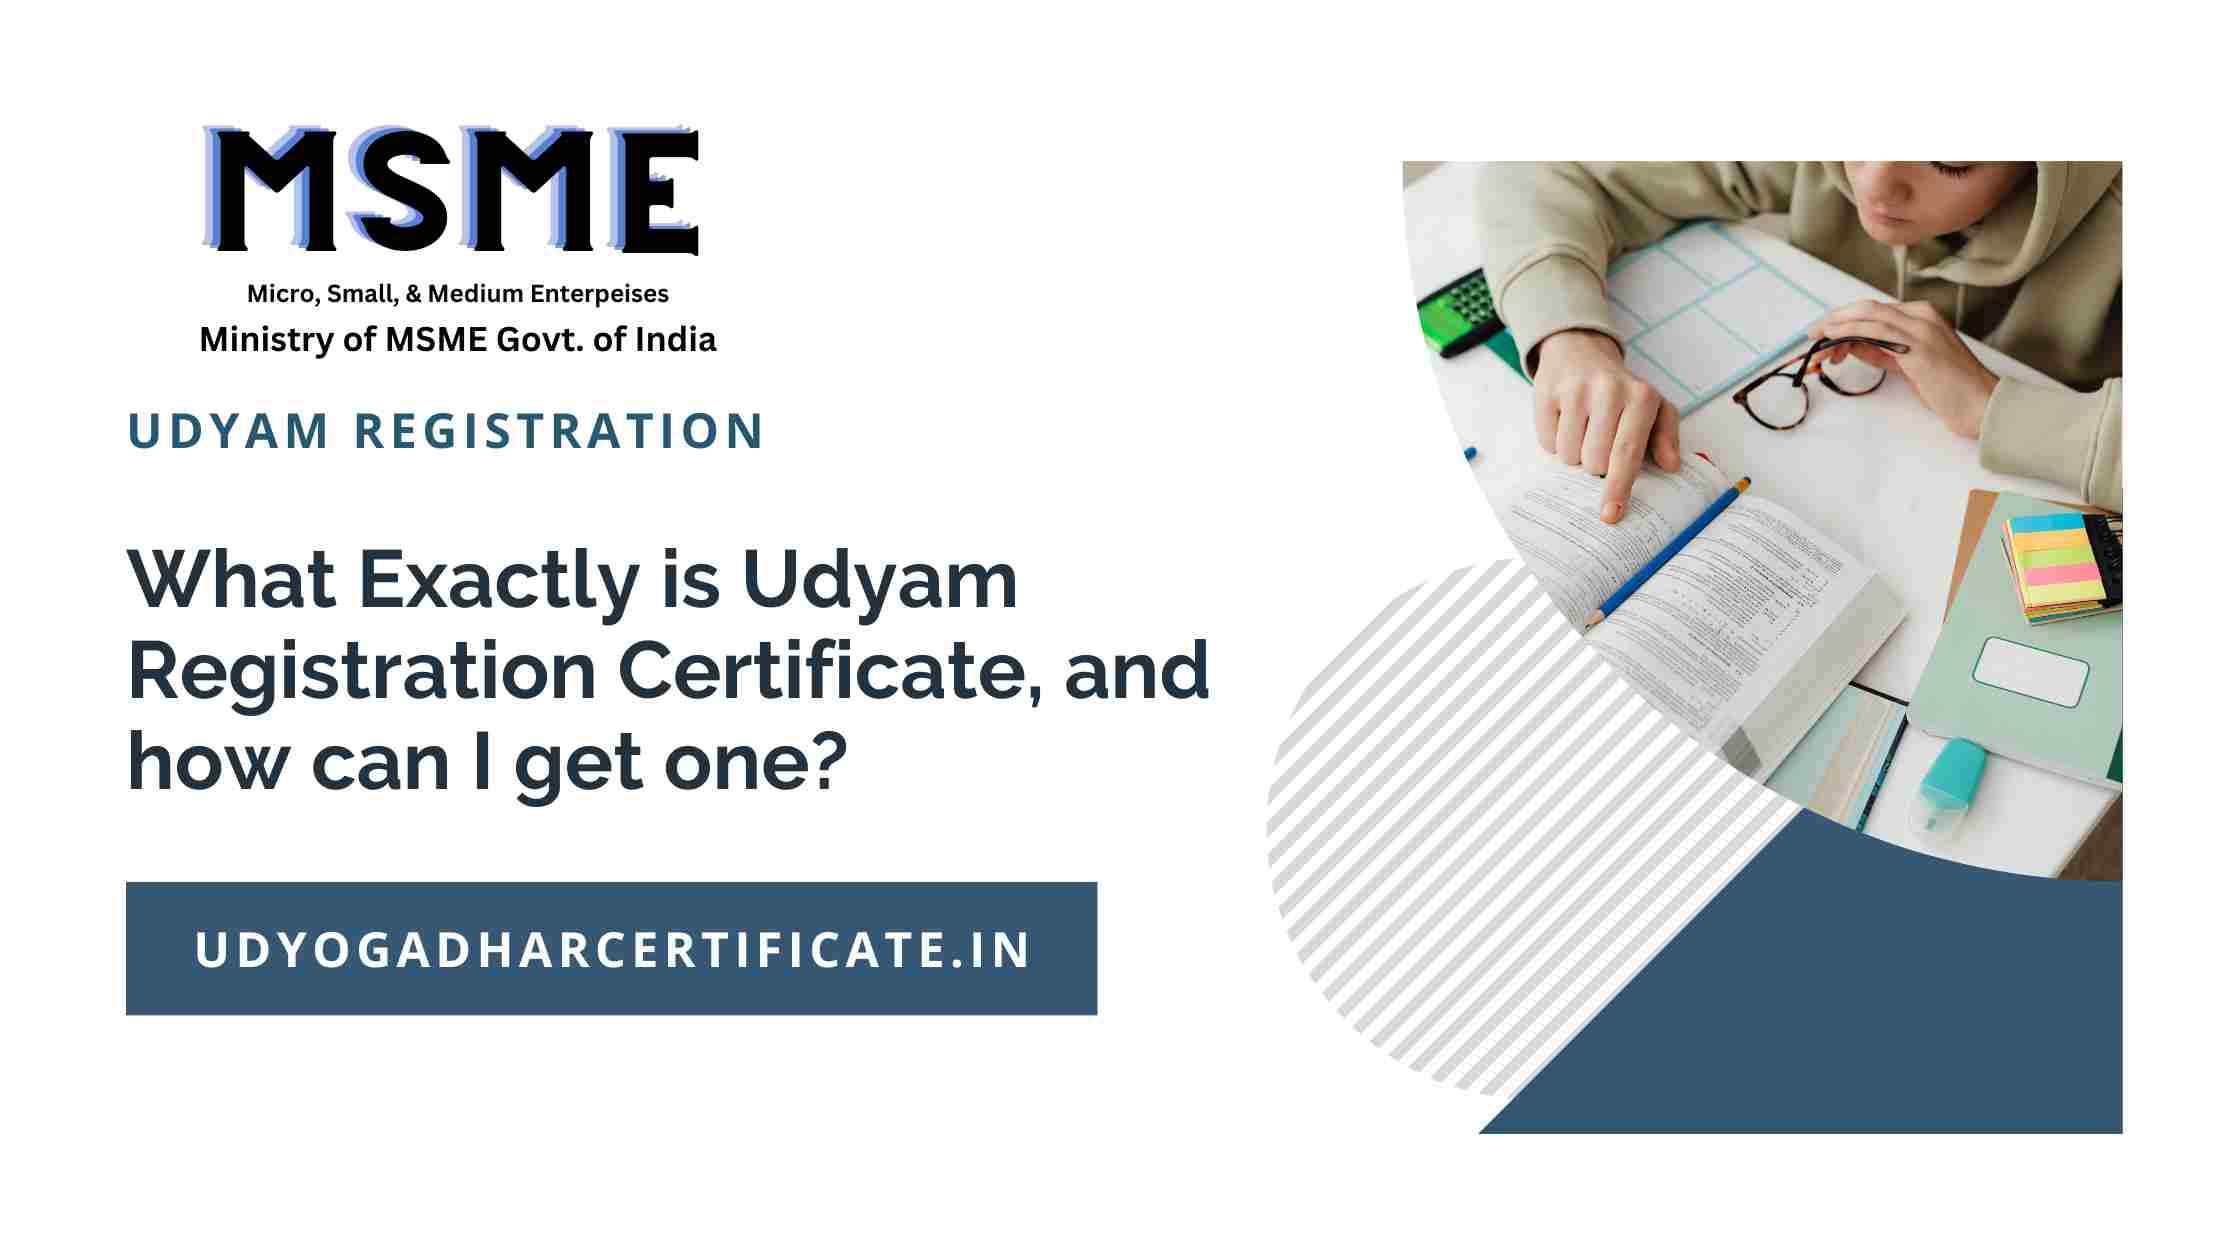 What Exactly is Udyam Registration Certificate, and how can I get one?